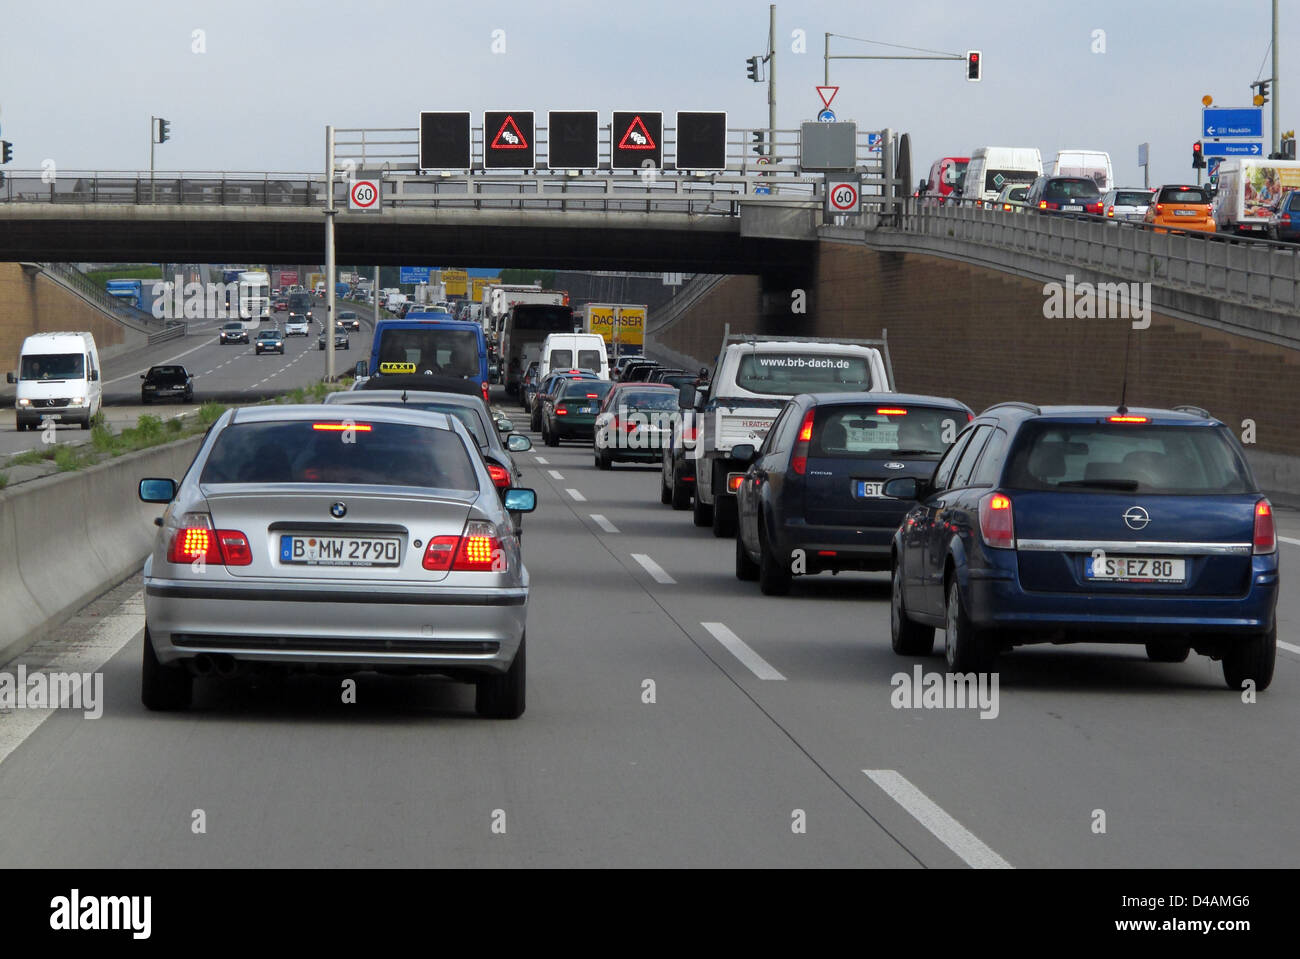 Berlin, Germany, a traffic jam on the motorway A 113 Stock Photo